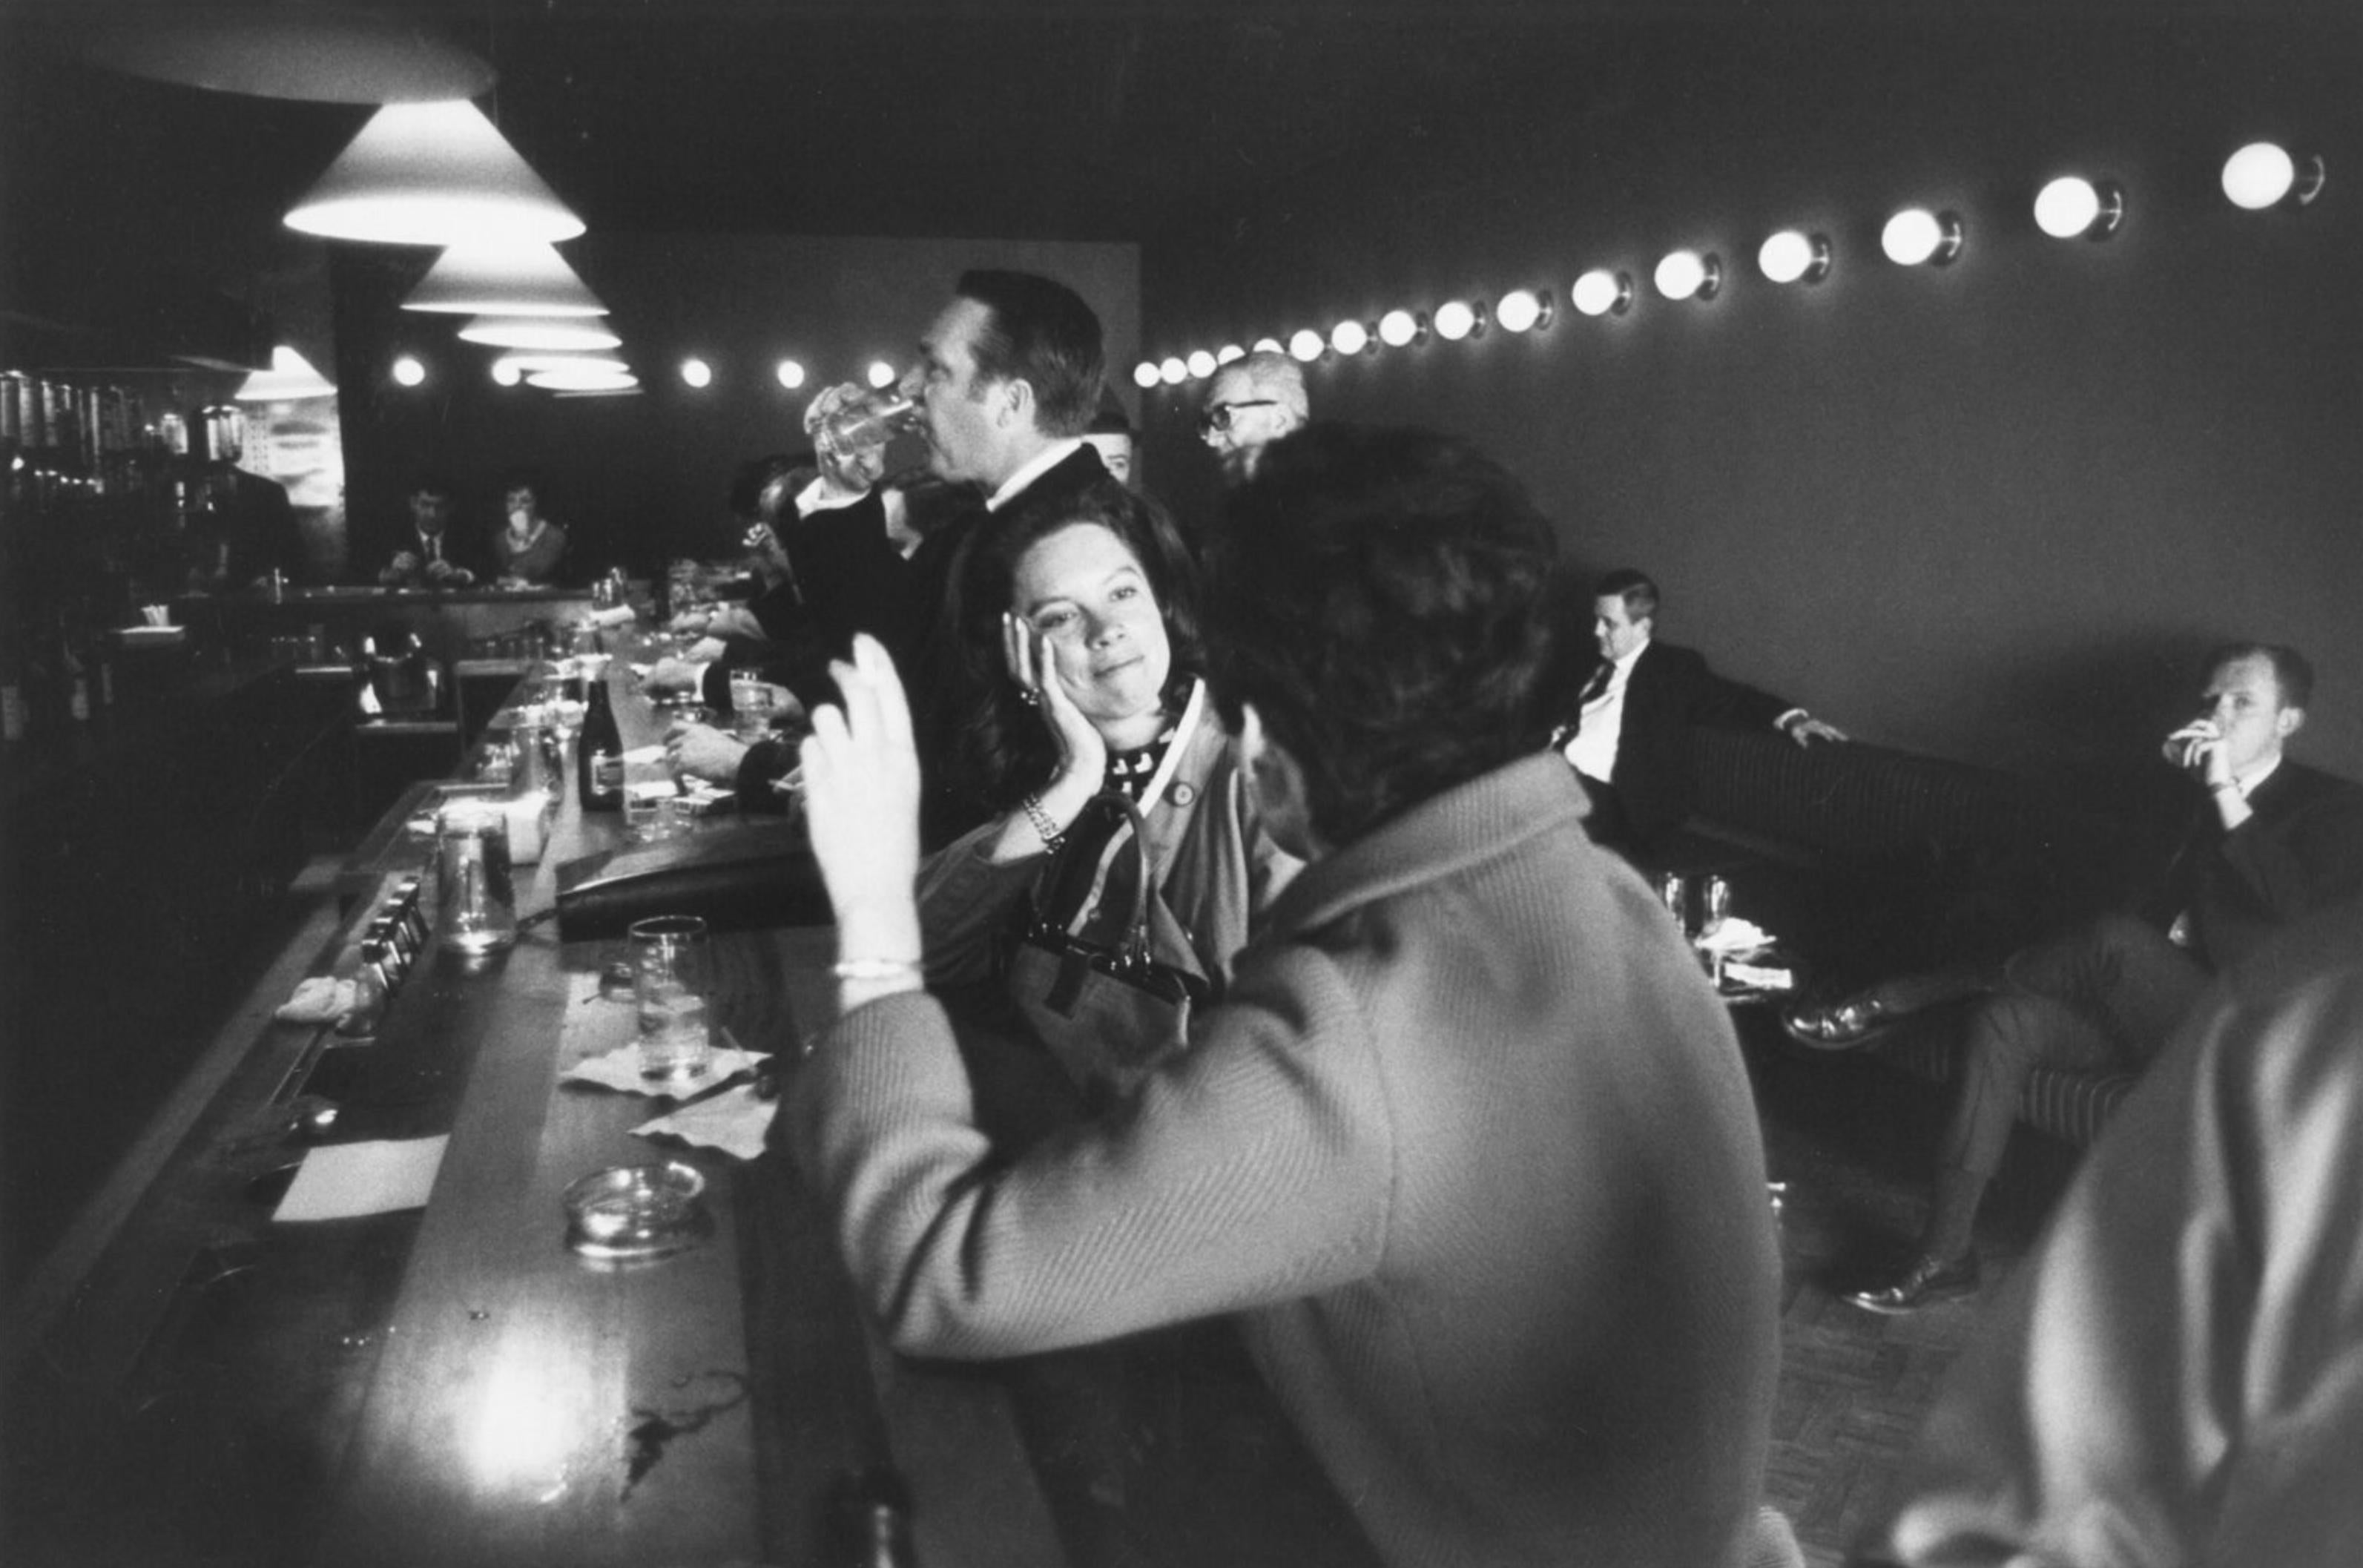 Garry Winogrand Black and White Photograph - Untitled from “Women Are Beautiful”